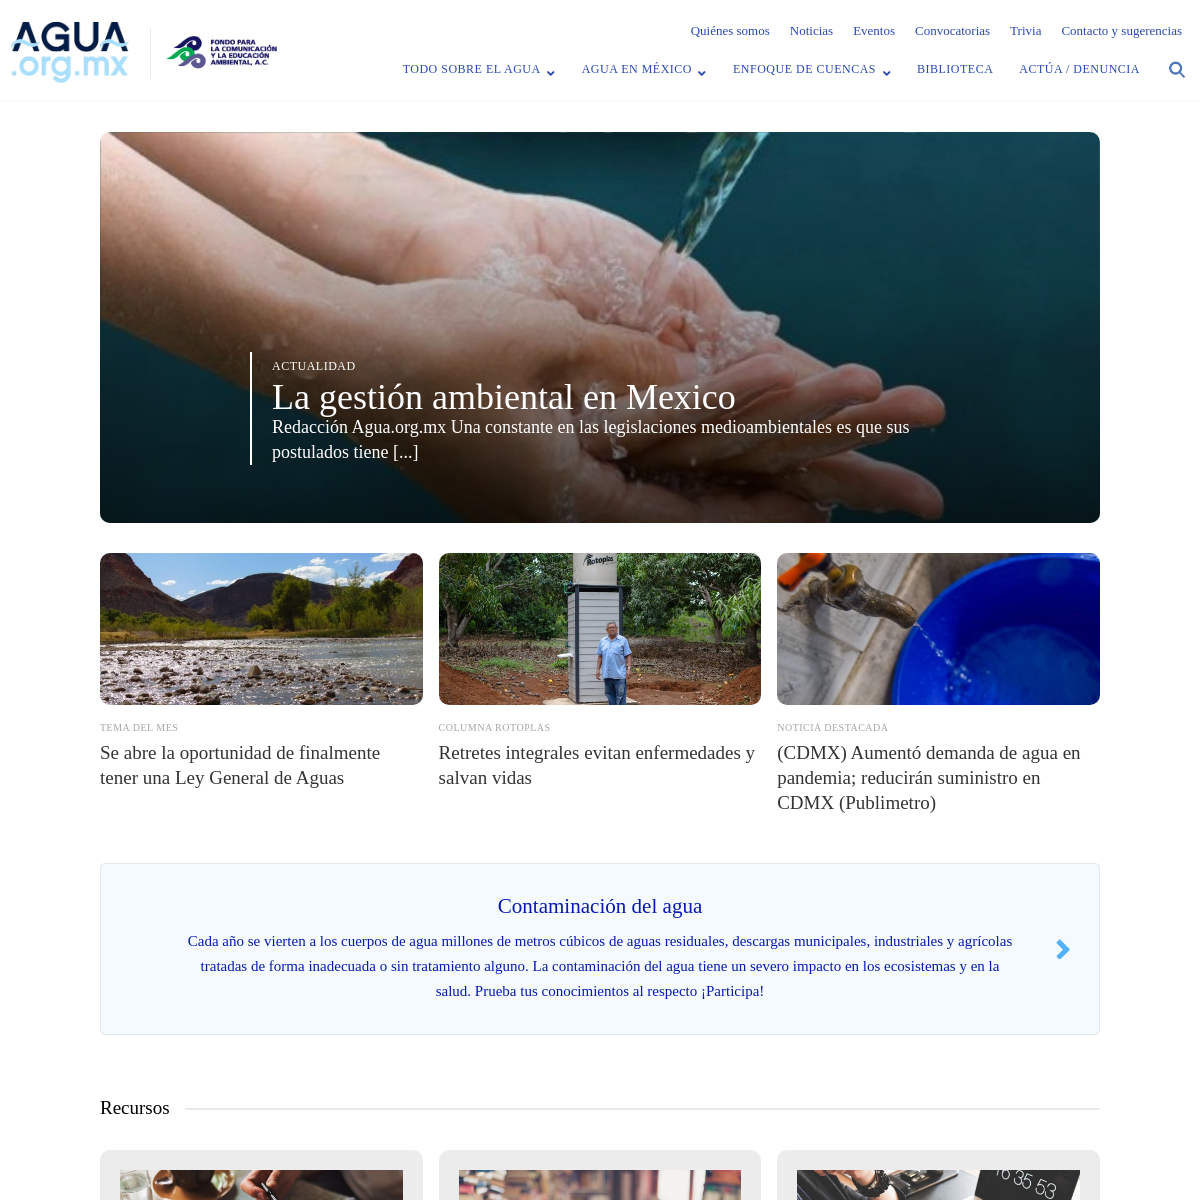 A complete backup of agua.org.mx